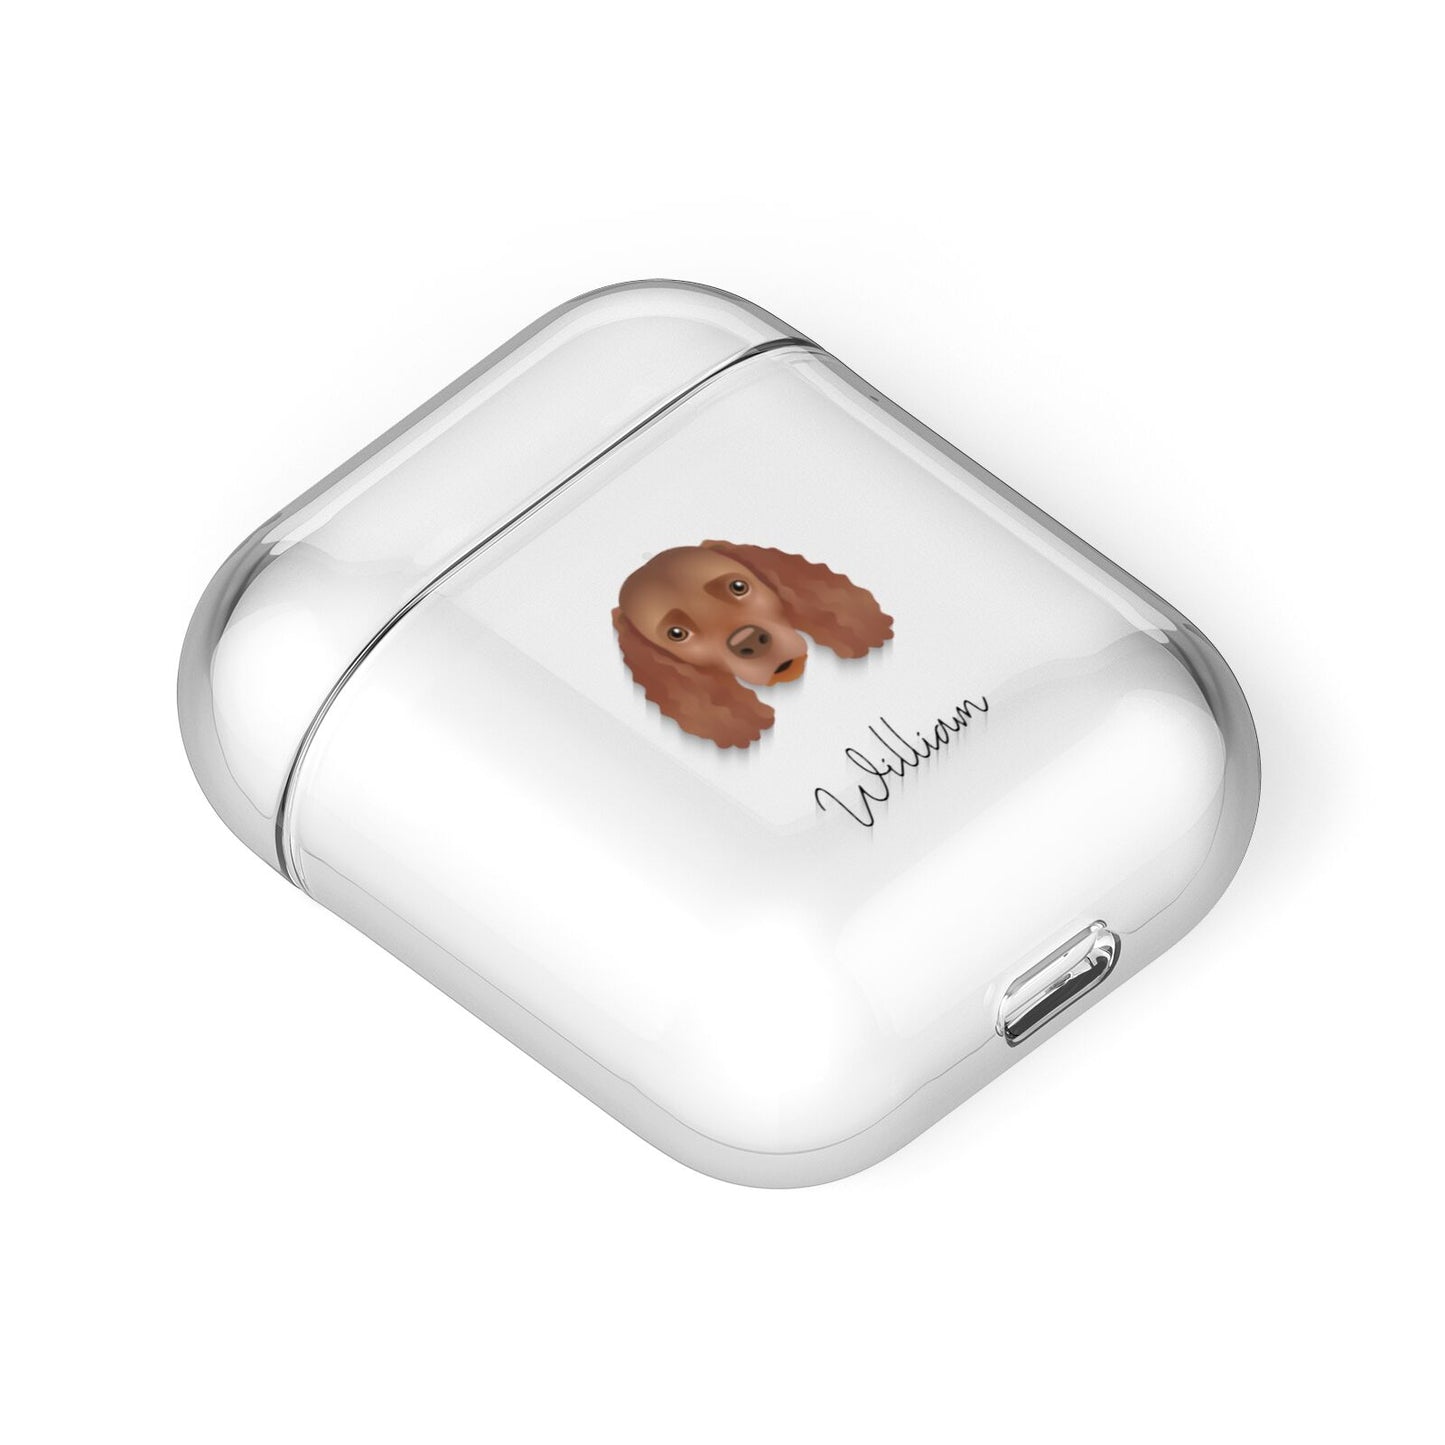 American Water Spaniel Personalised AirPods Case Laid Flat